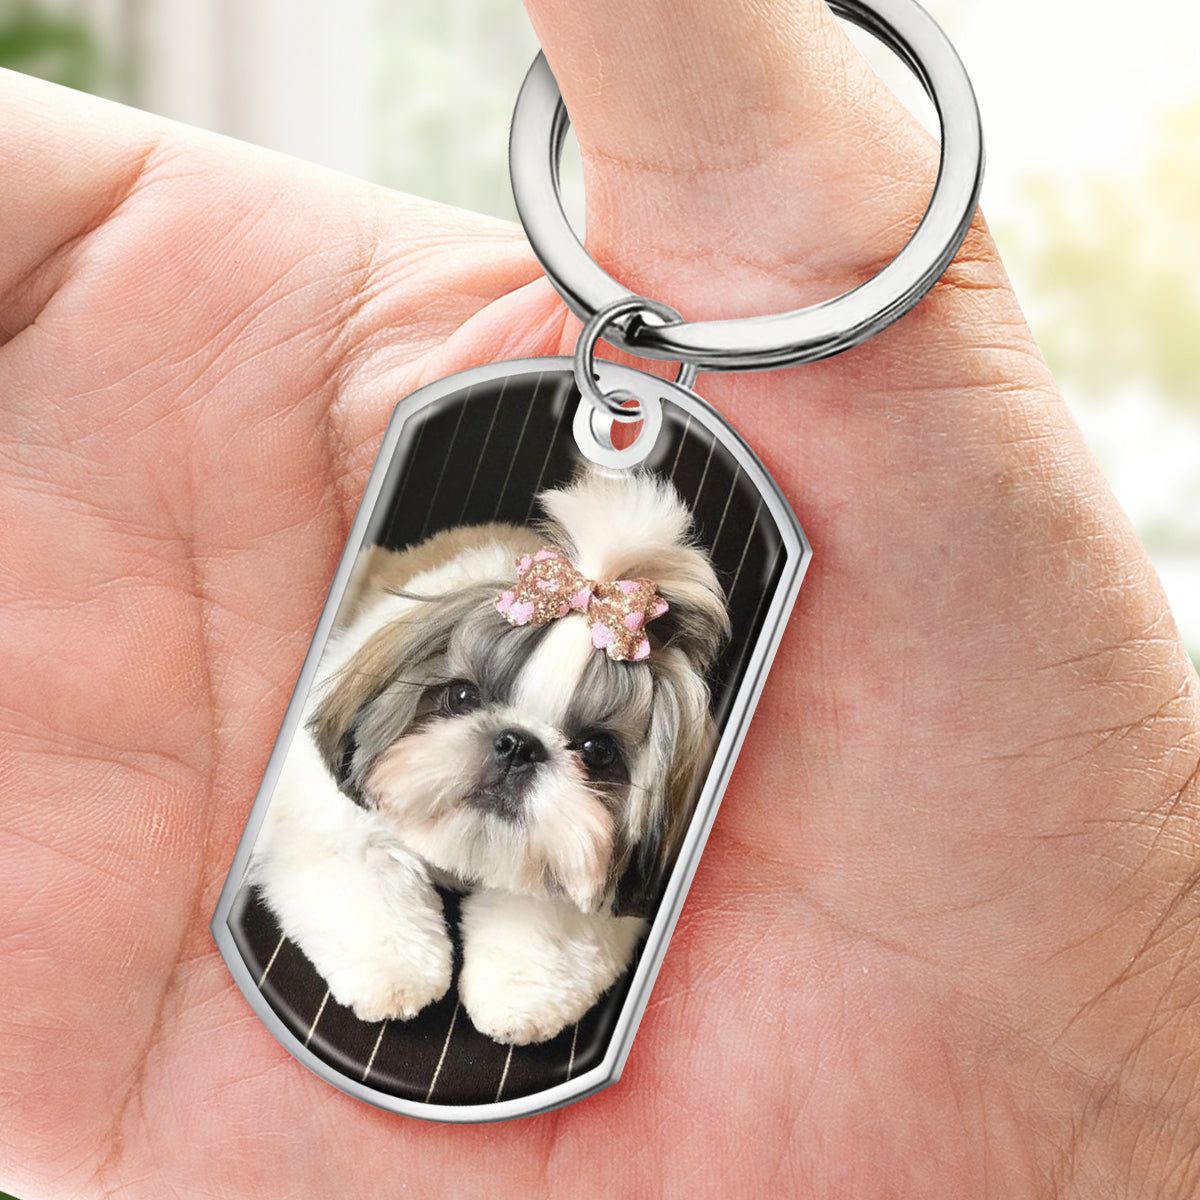 J Pawfect House - Dog Keychain Dog Memorial Gifts for Loss of Dog - Personalized Keychains - Pet Memorial Gifts Cat Keychain, with Gift Box / Pack 2 